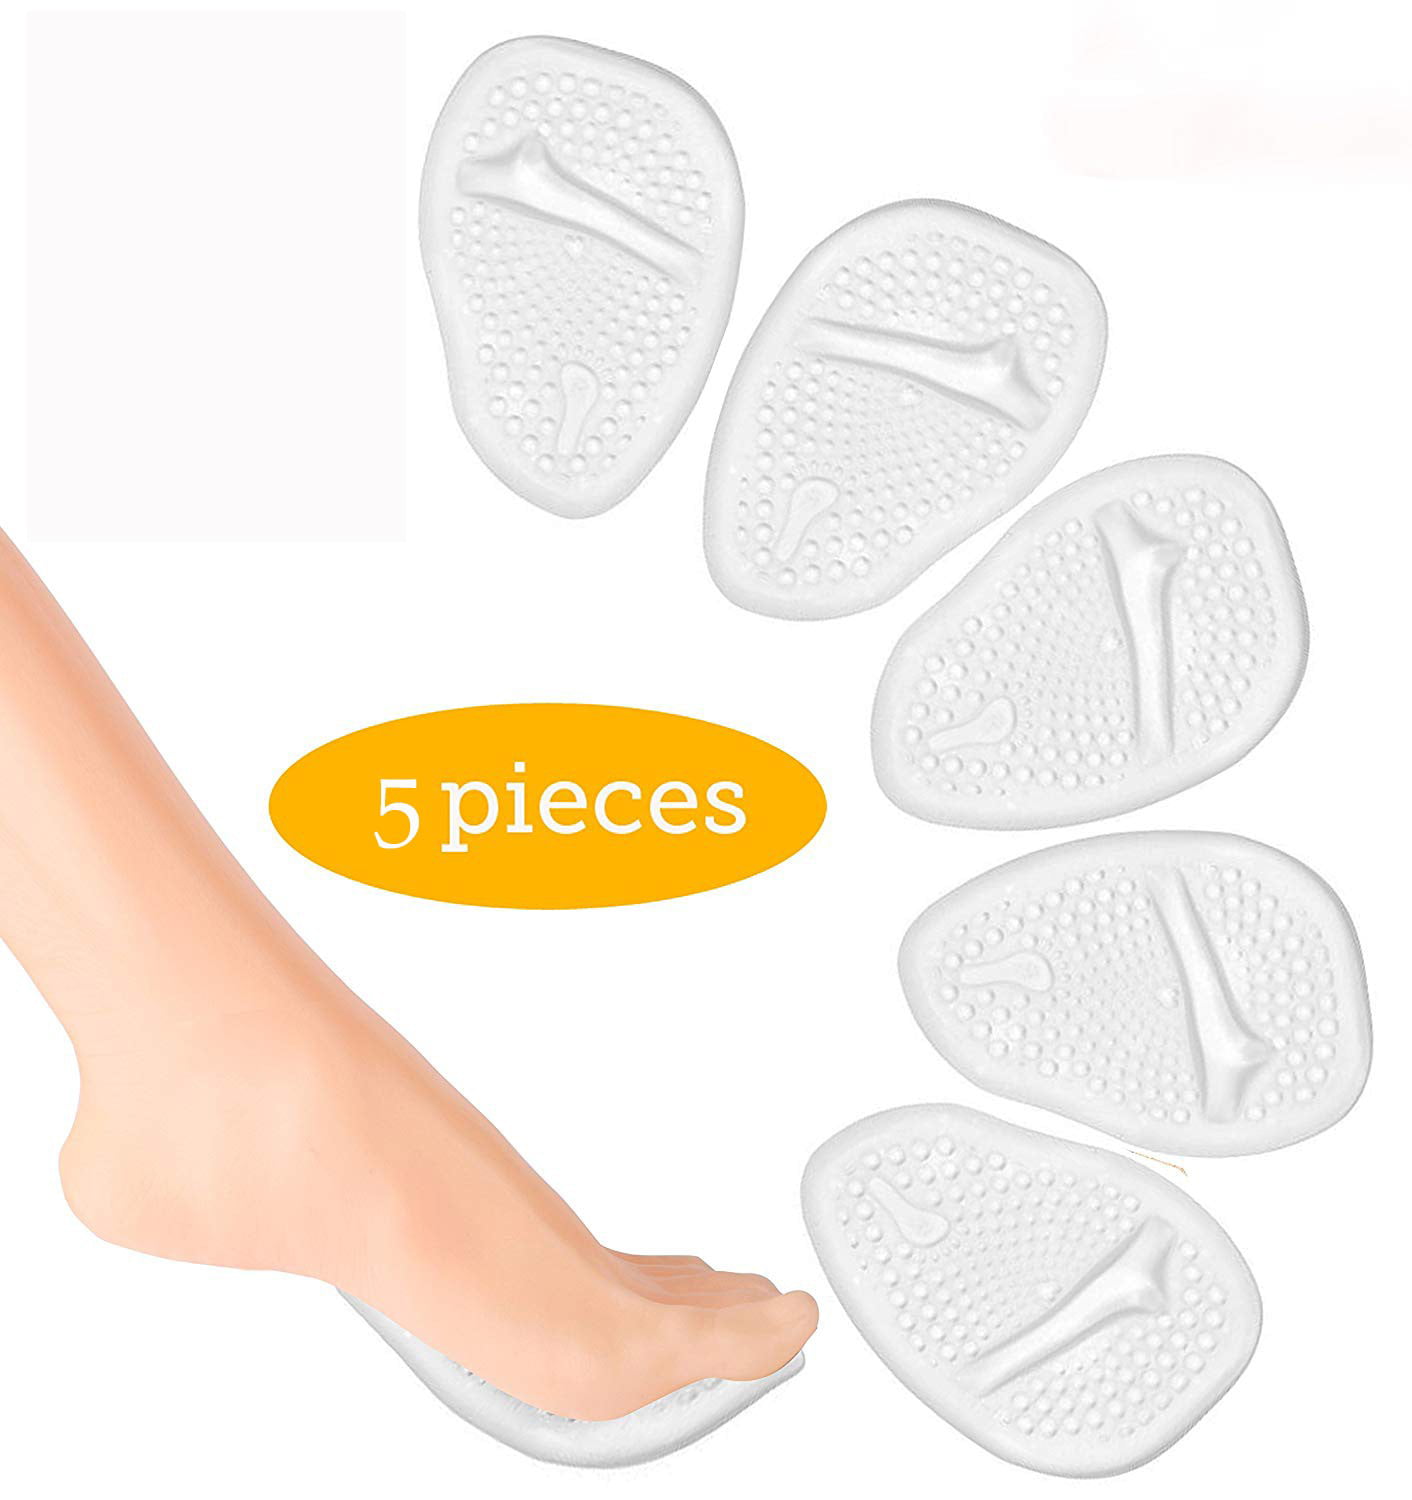 Silicone Gel Foot Pads Metatarsal Pads 